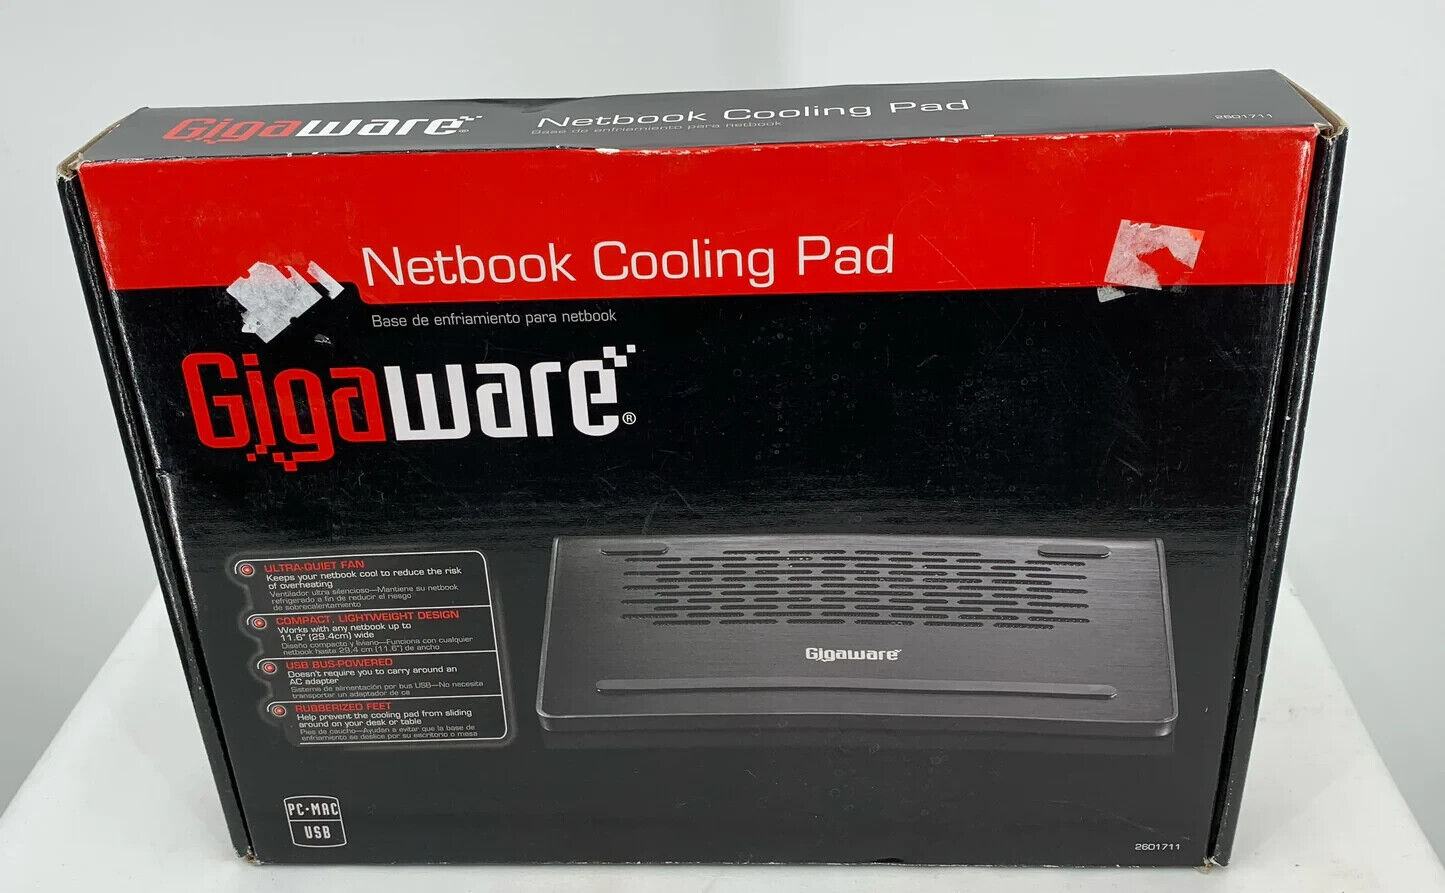 Cool Your Jets NEW Gigaware Netbook USB Cooling Pad 10A10 For PC & MAC